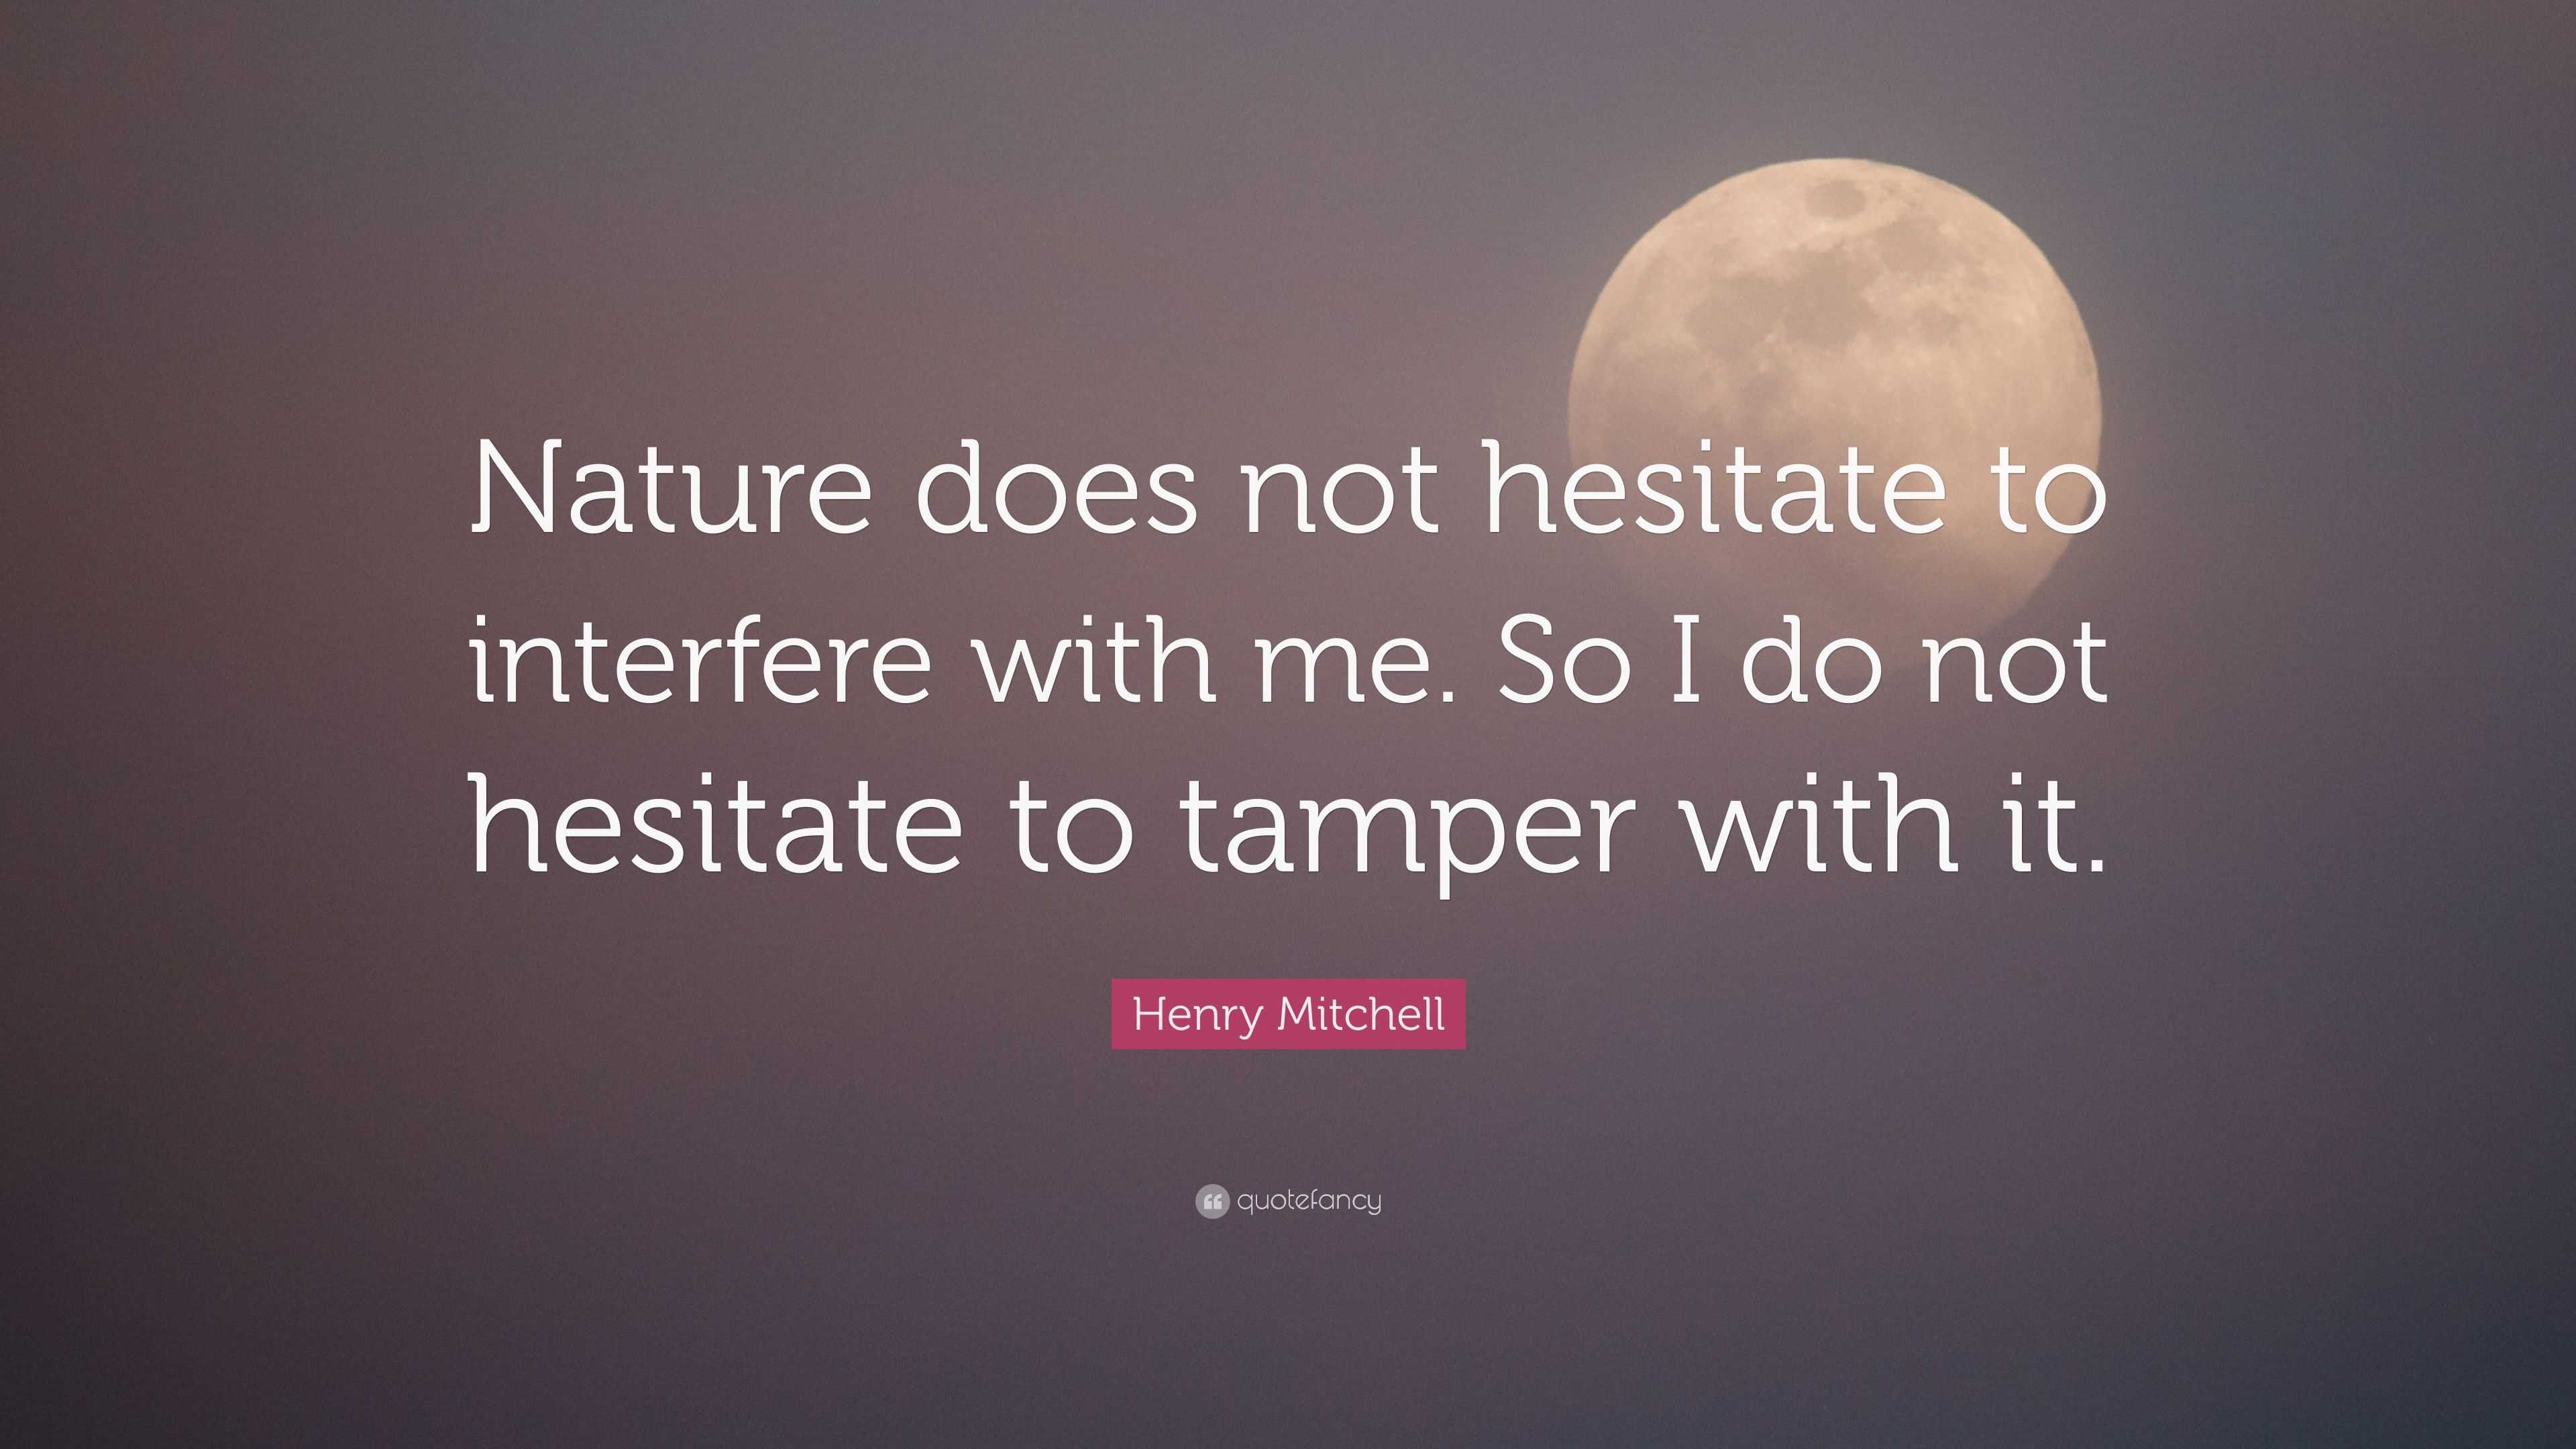 Henry Mitchell Quote: “Nature does hesitate to interfere with me. So I do not hesitate